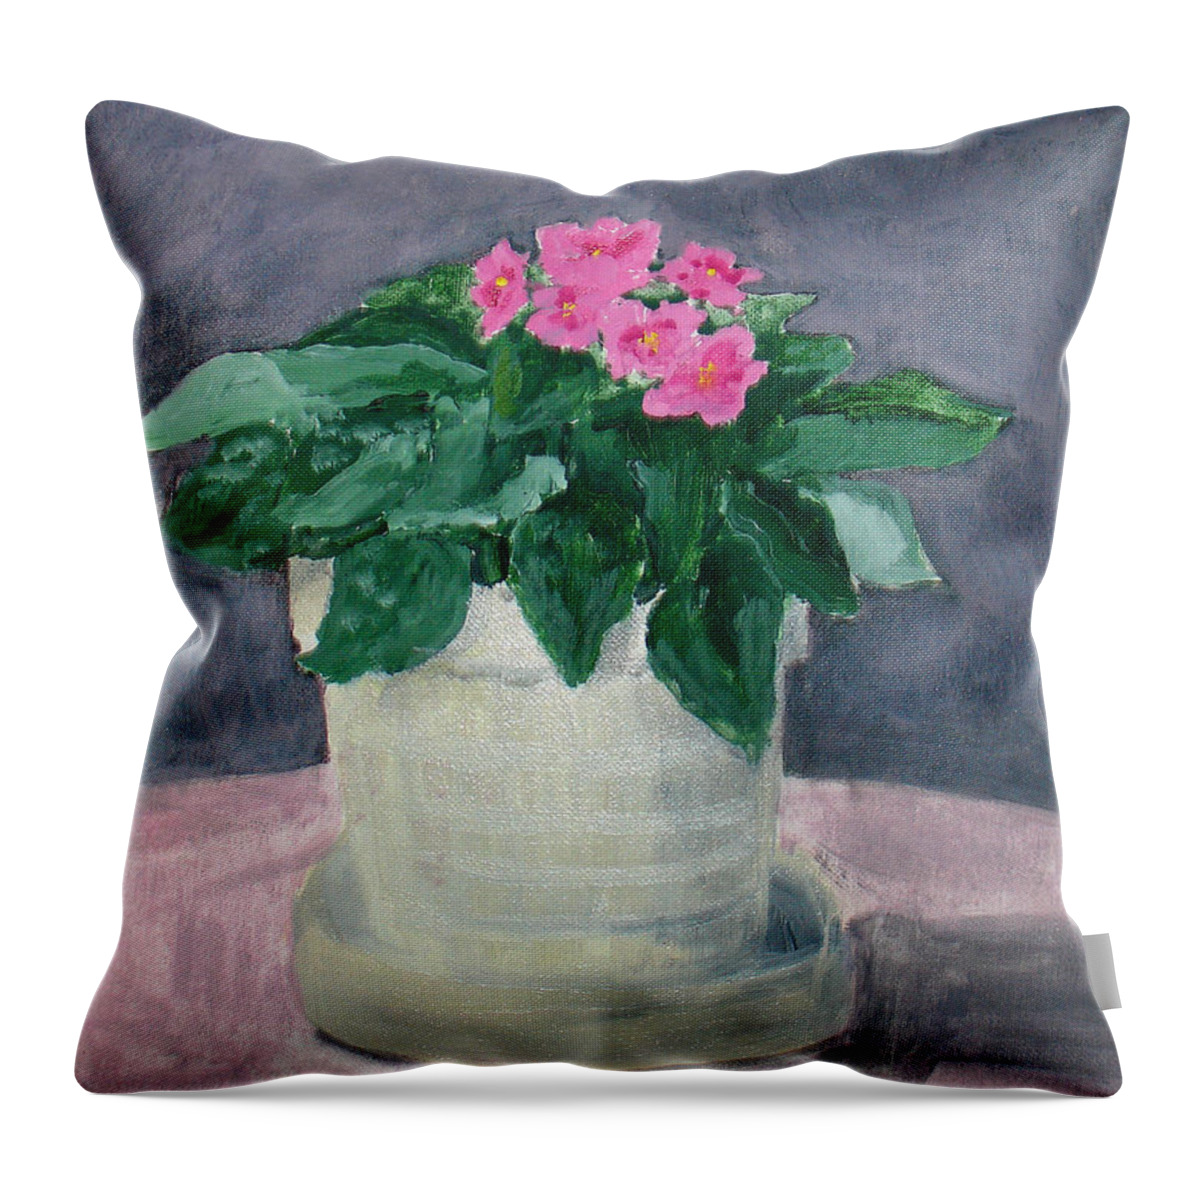 Floral Throw Pillow featuring the painting African Violet by Steve Karol